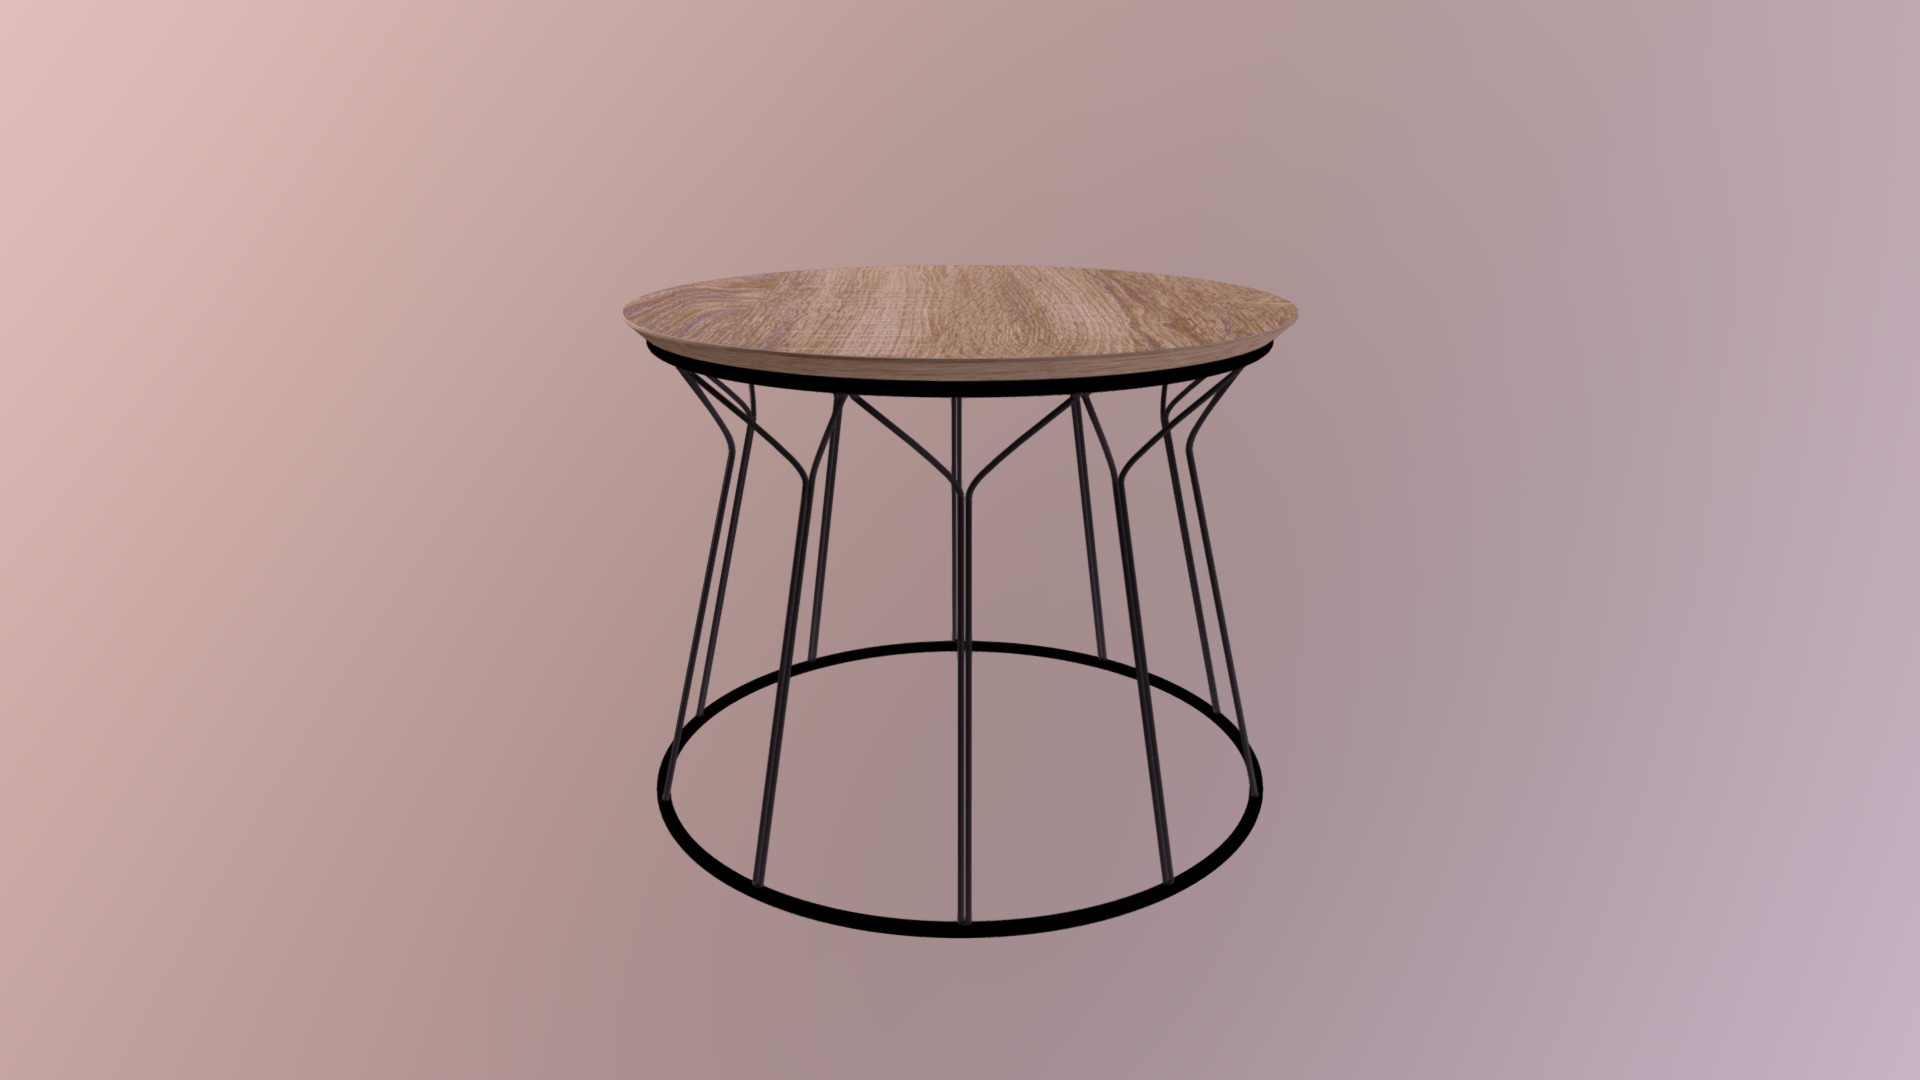 3D model Table1 - This is a 3D model of the Table1. The 3D model is about a stool against a pink background.